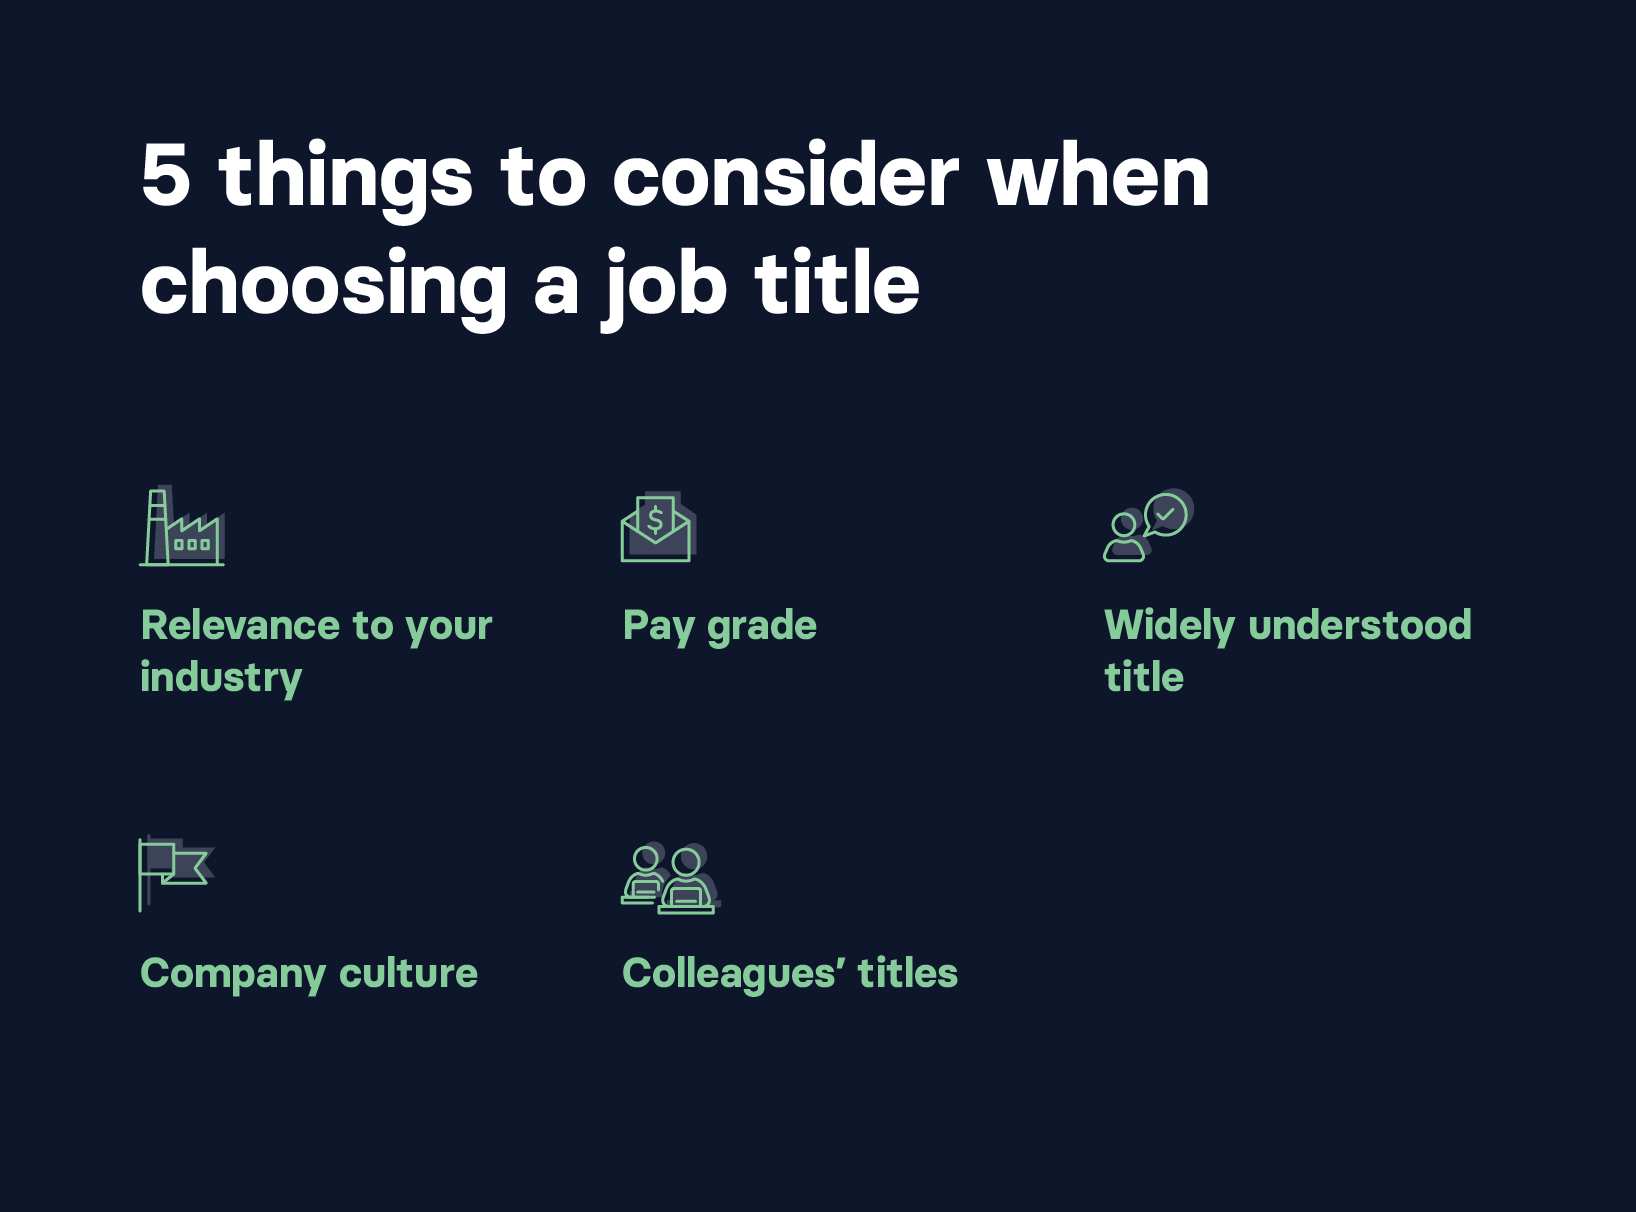 Graphic showing 5 things to consider when choosing a job title